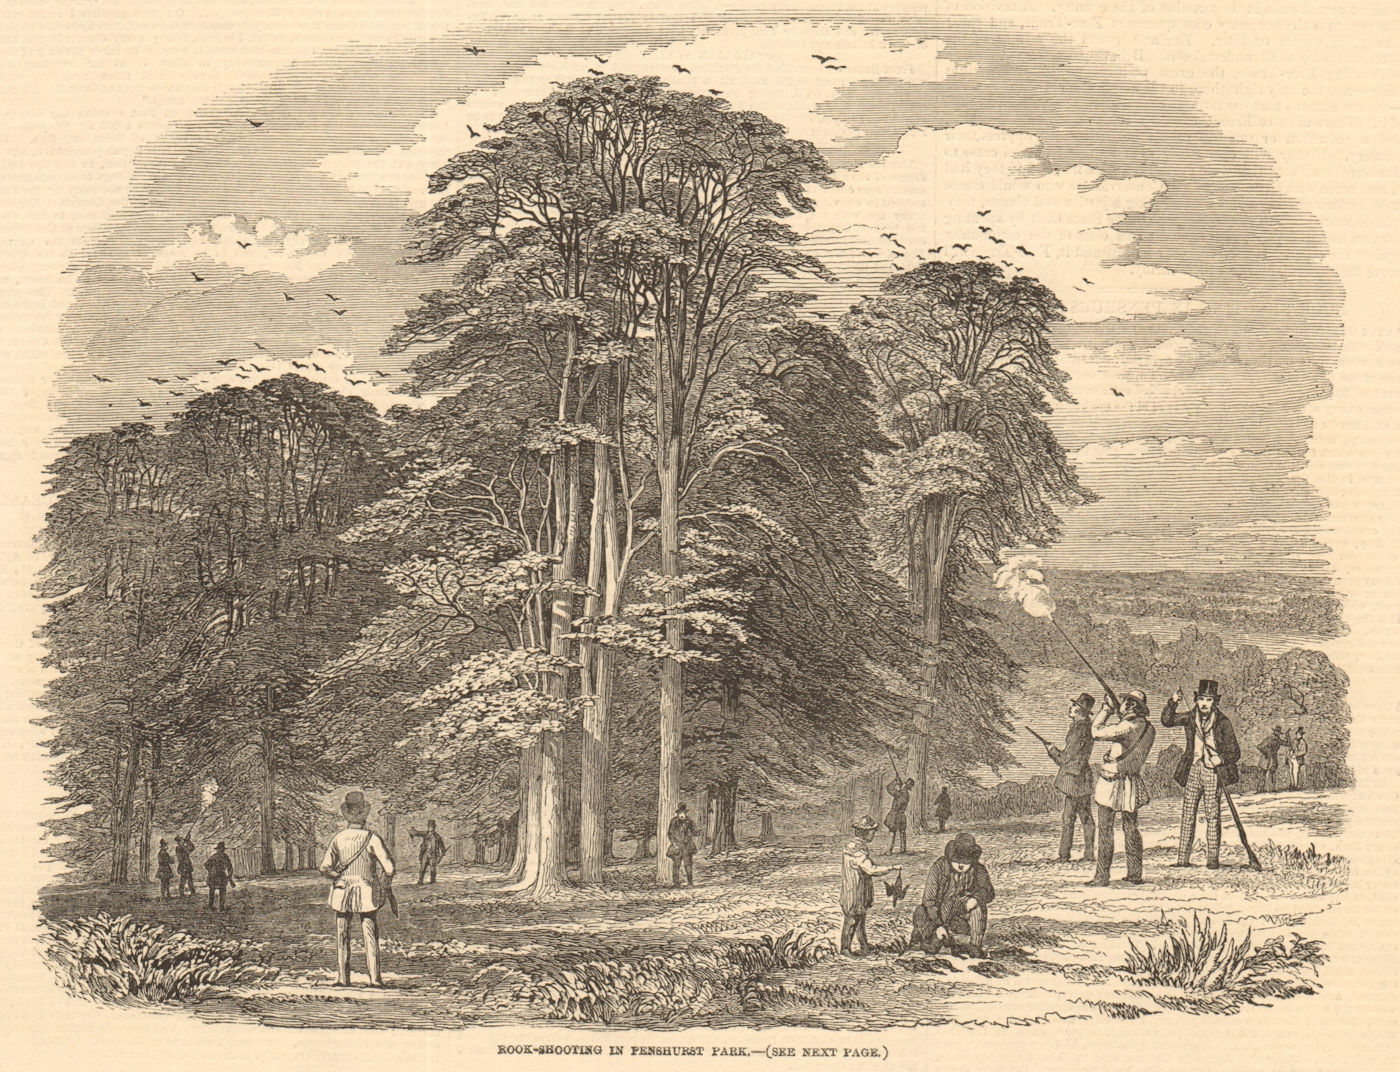 Associate Product Rook-shooting in Penshurst Park. Kent. Hunting 1850 antique ILN full page print